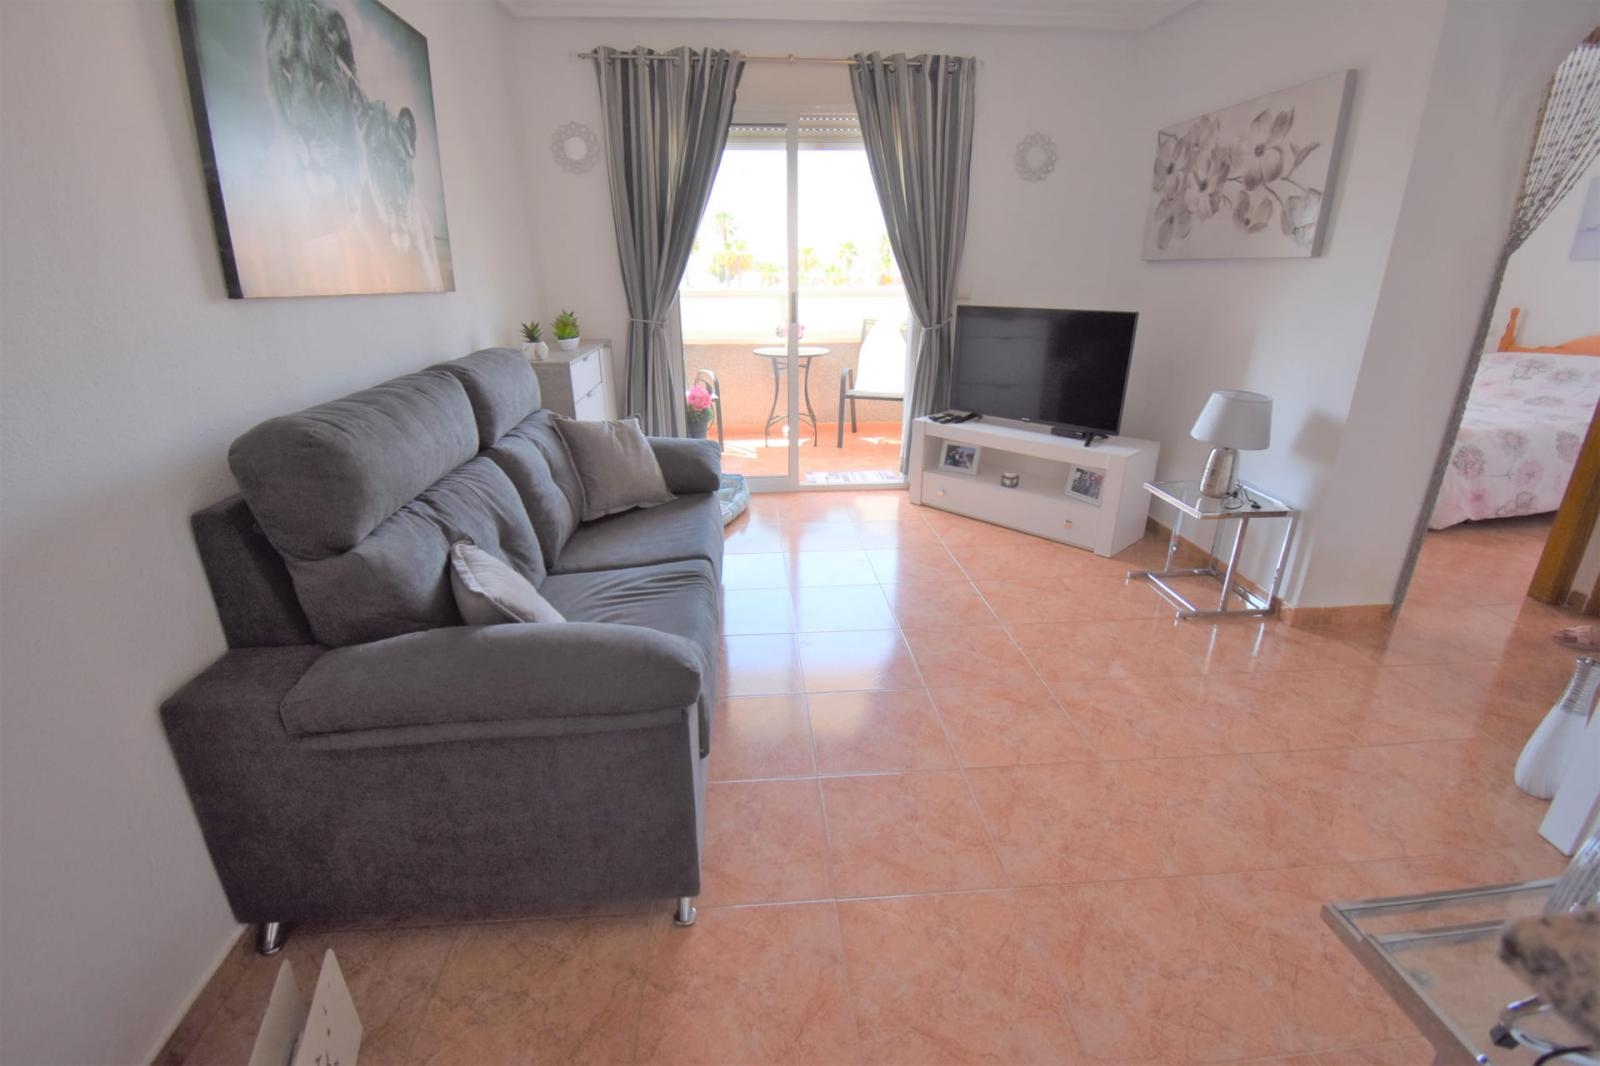 BEAUTIFUL BRIGHT APARTMENT WITH VIEWS AND COMMUNAL POOL IN AGUAS NUEVAS